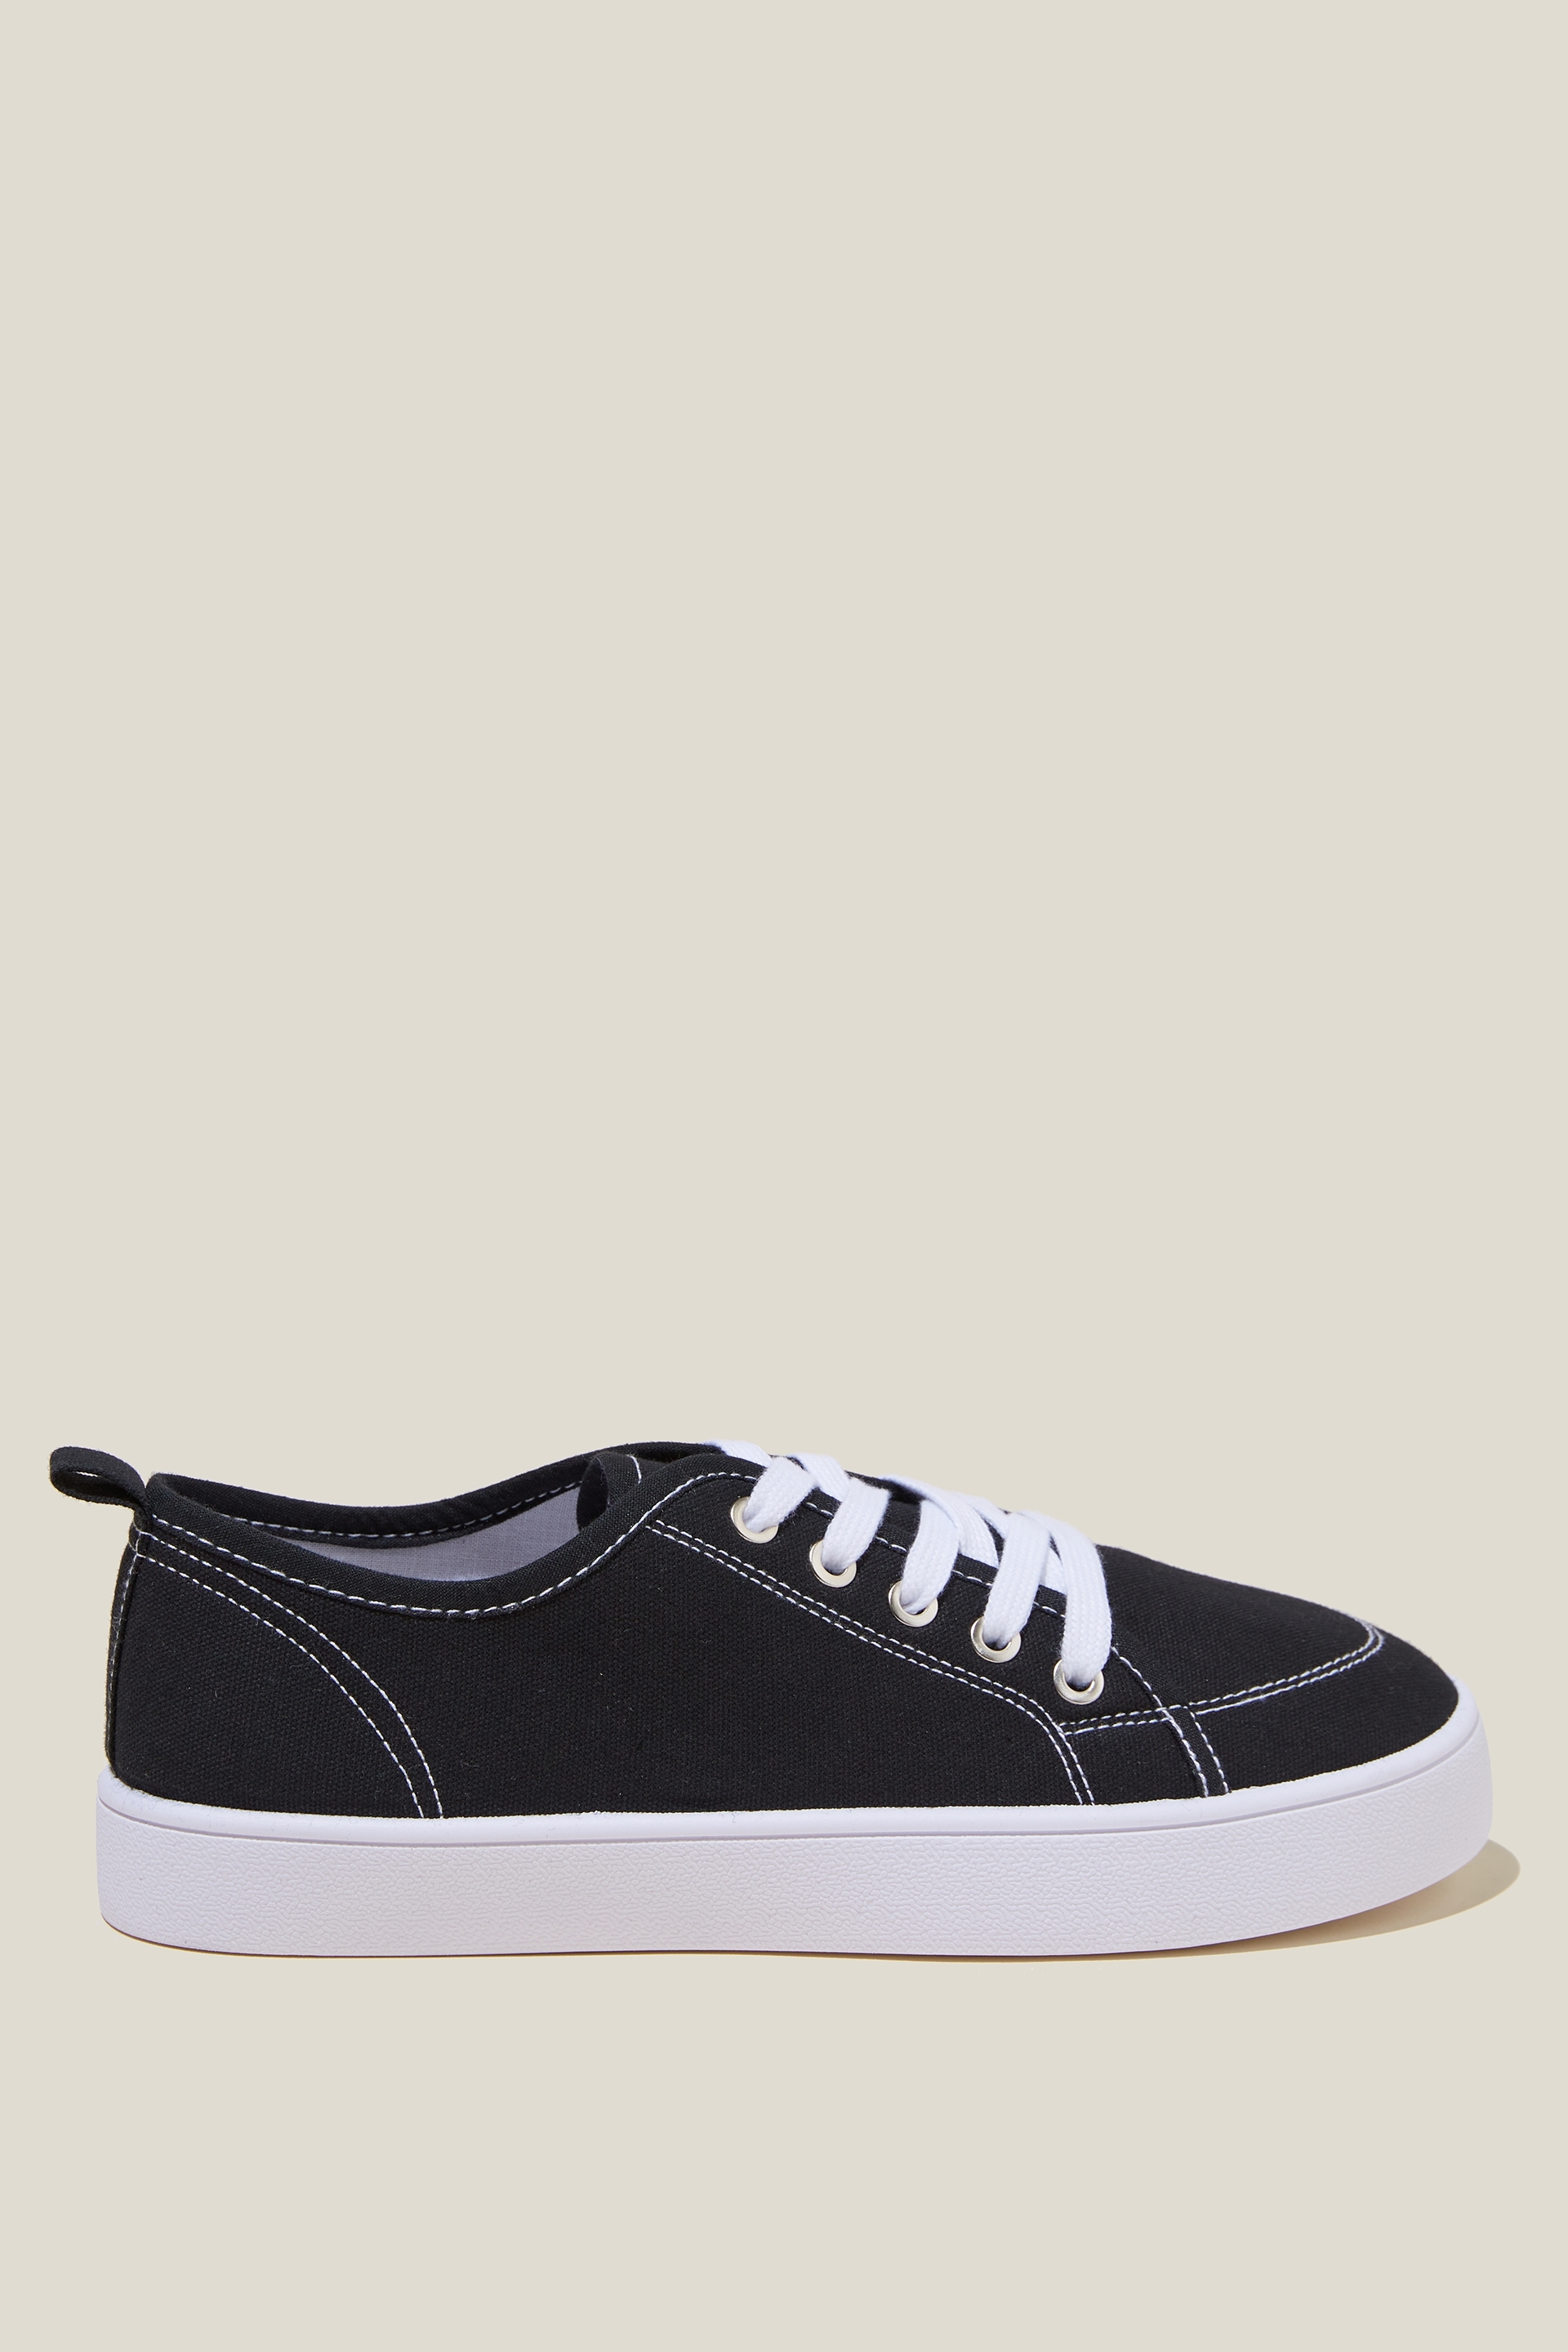 Saylor Lace Up Plimsoll